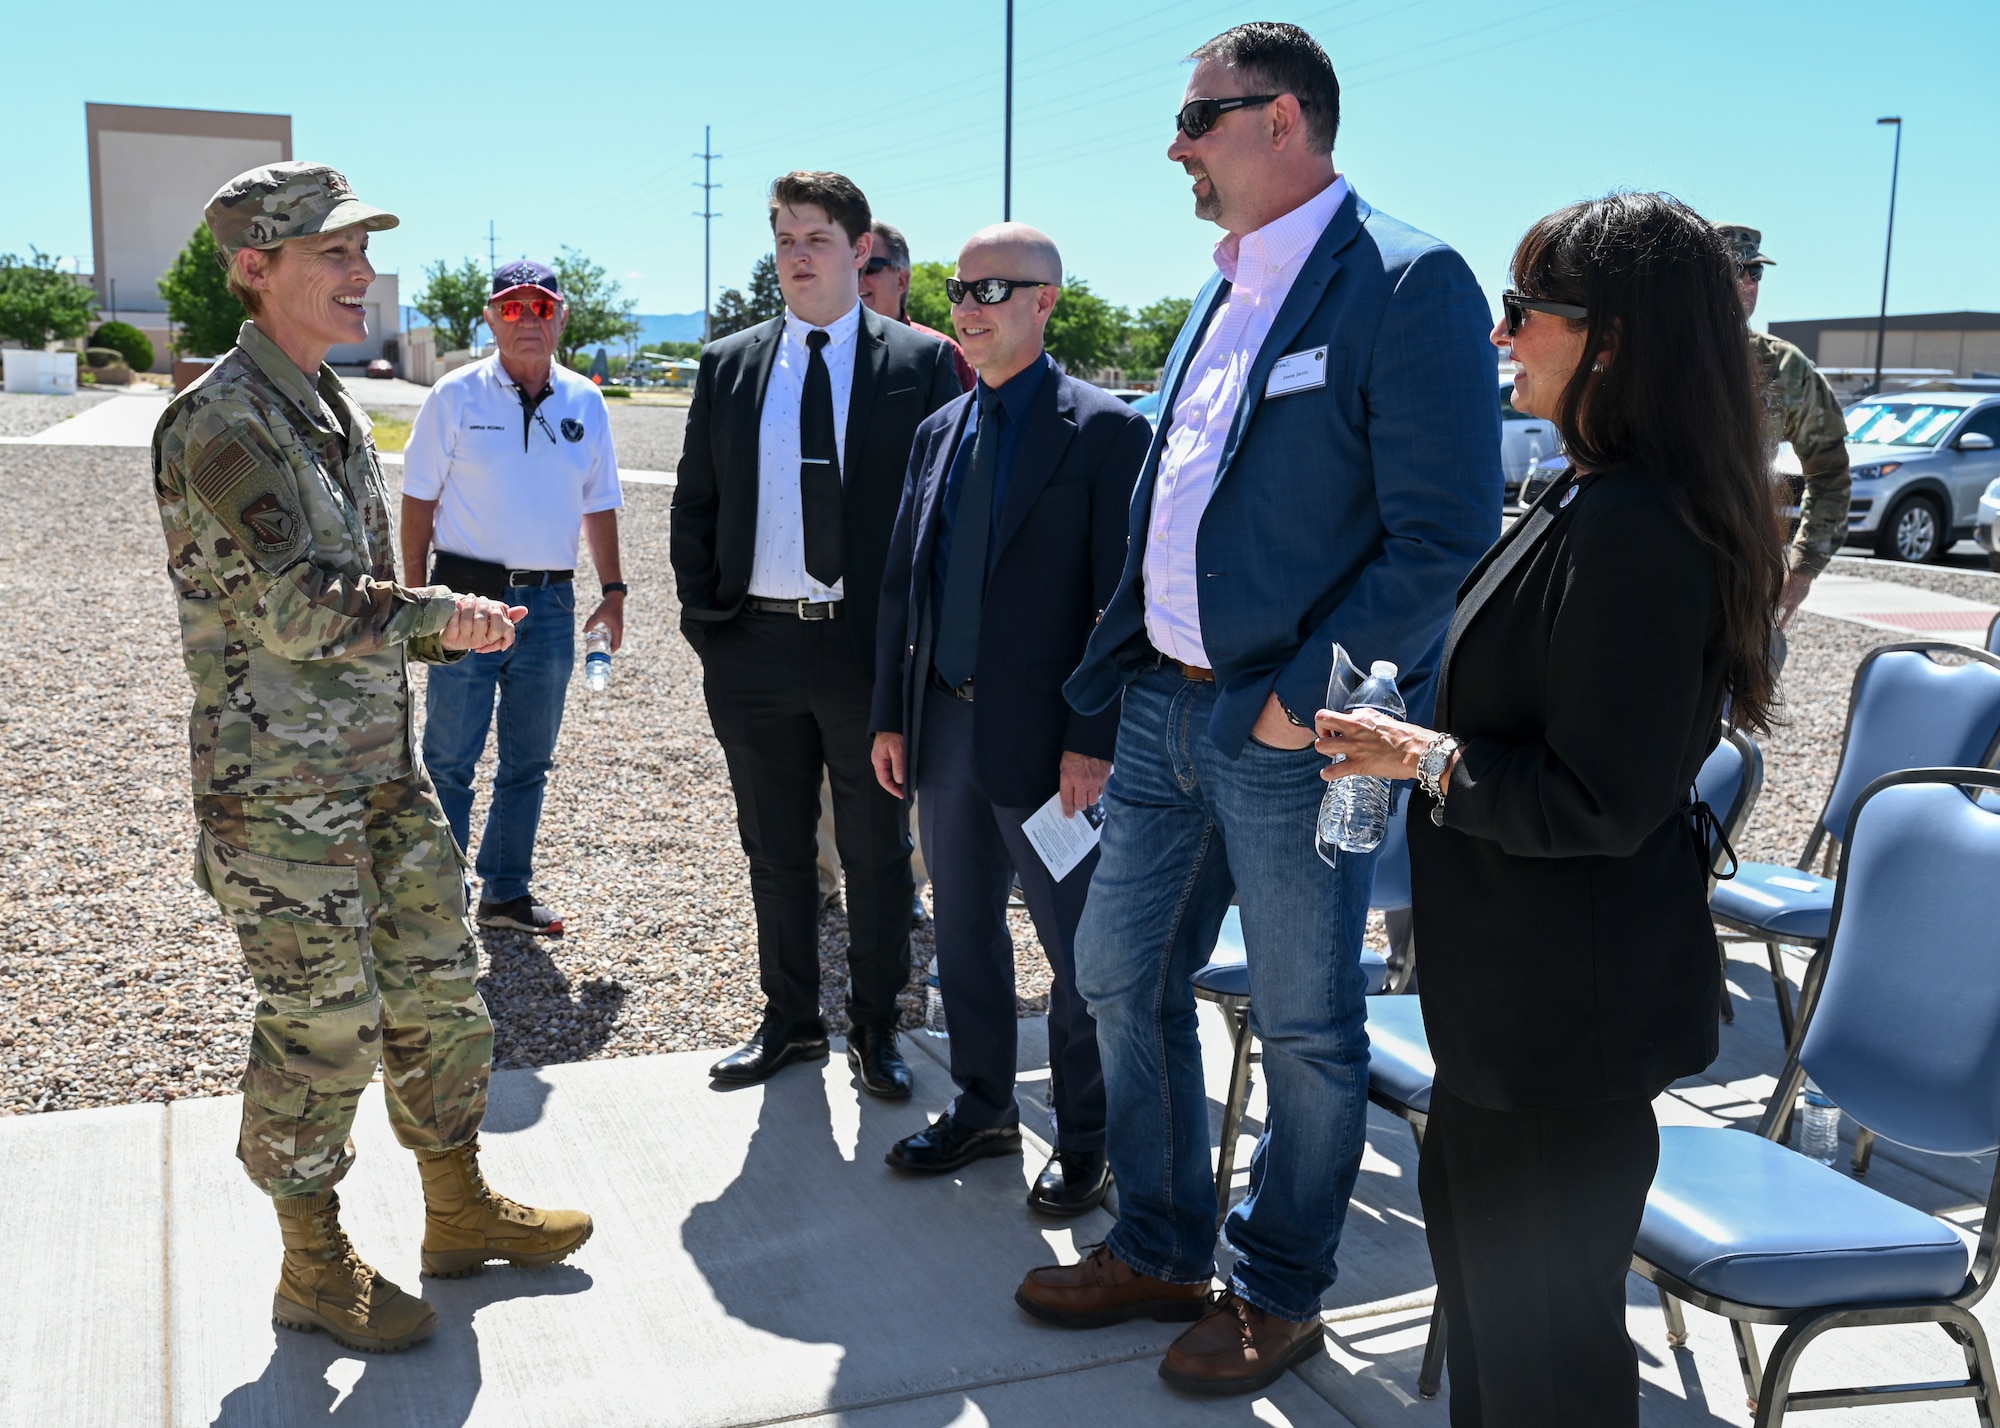 Following the ribbon cutting ceremony May 20 for a new Air Force Research Laboratory facility at Kirtland AFB, N.M., AFRL Commander Maj. Gen. Heather Pringle speaks with guests Synthia Jaramillo, Albuquerque Director of Economic Development; Jason Jarvis representing U.S. Senator Martin Heinrich; Matt Miller representing U.S. Congresswoman Teresa Leger Fernandez; and Angelo Champion representing U.S. Senator Ben Ray Lujan, while Sherman McCorkle CEO and founder of the Kirtland Partnership Committee looks on. (U.S. Air Force photo/Tech. Sgt. Jenna Bigham)